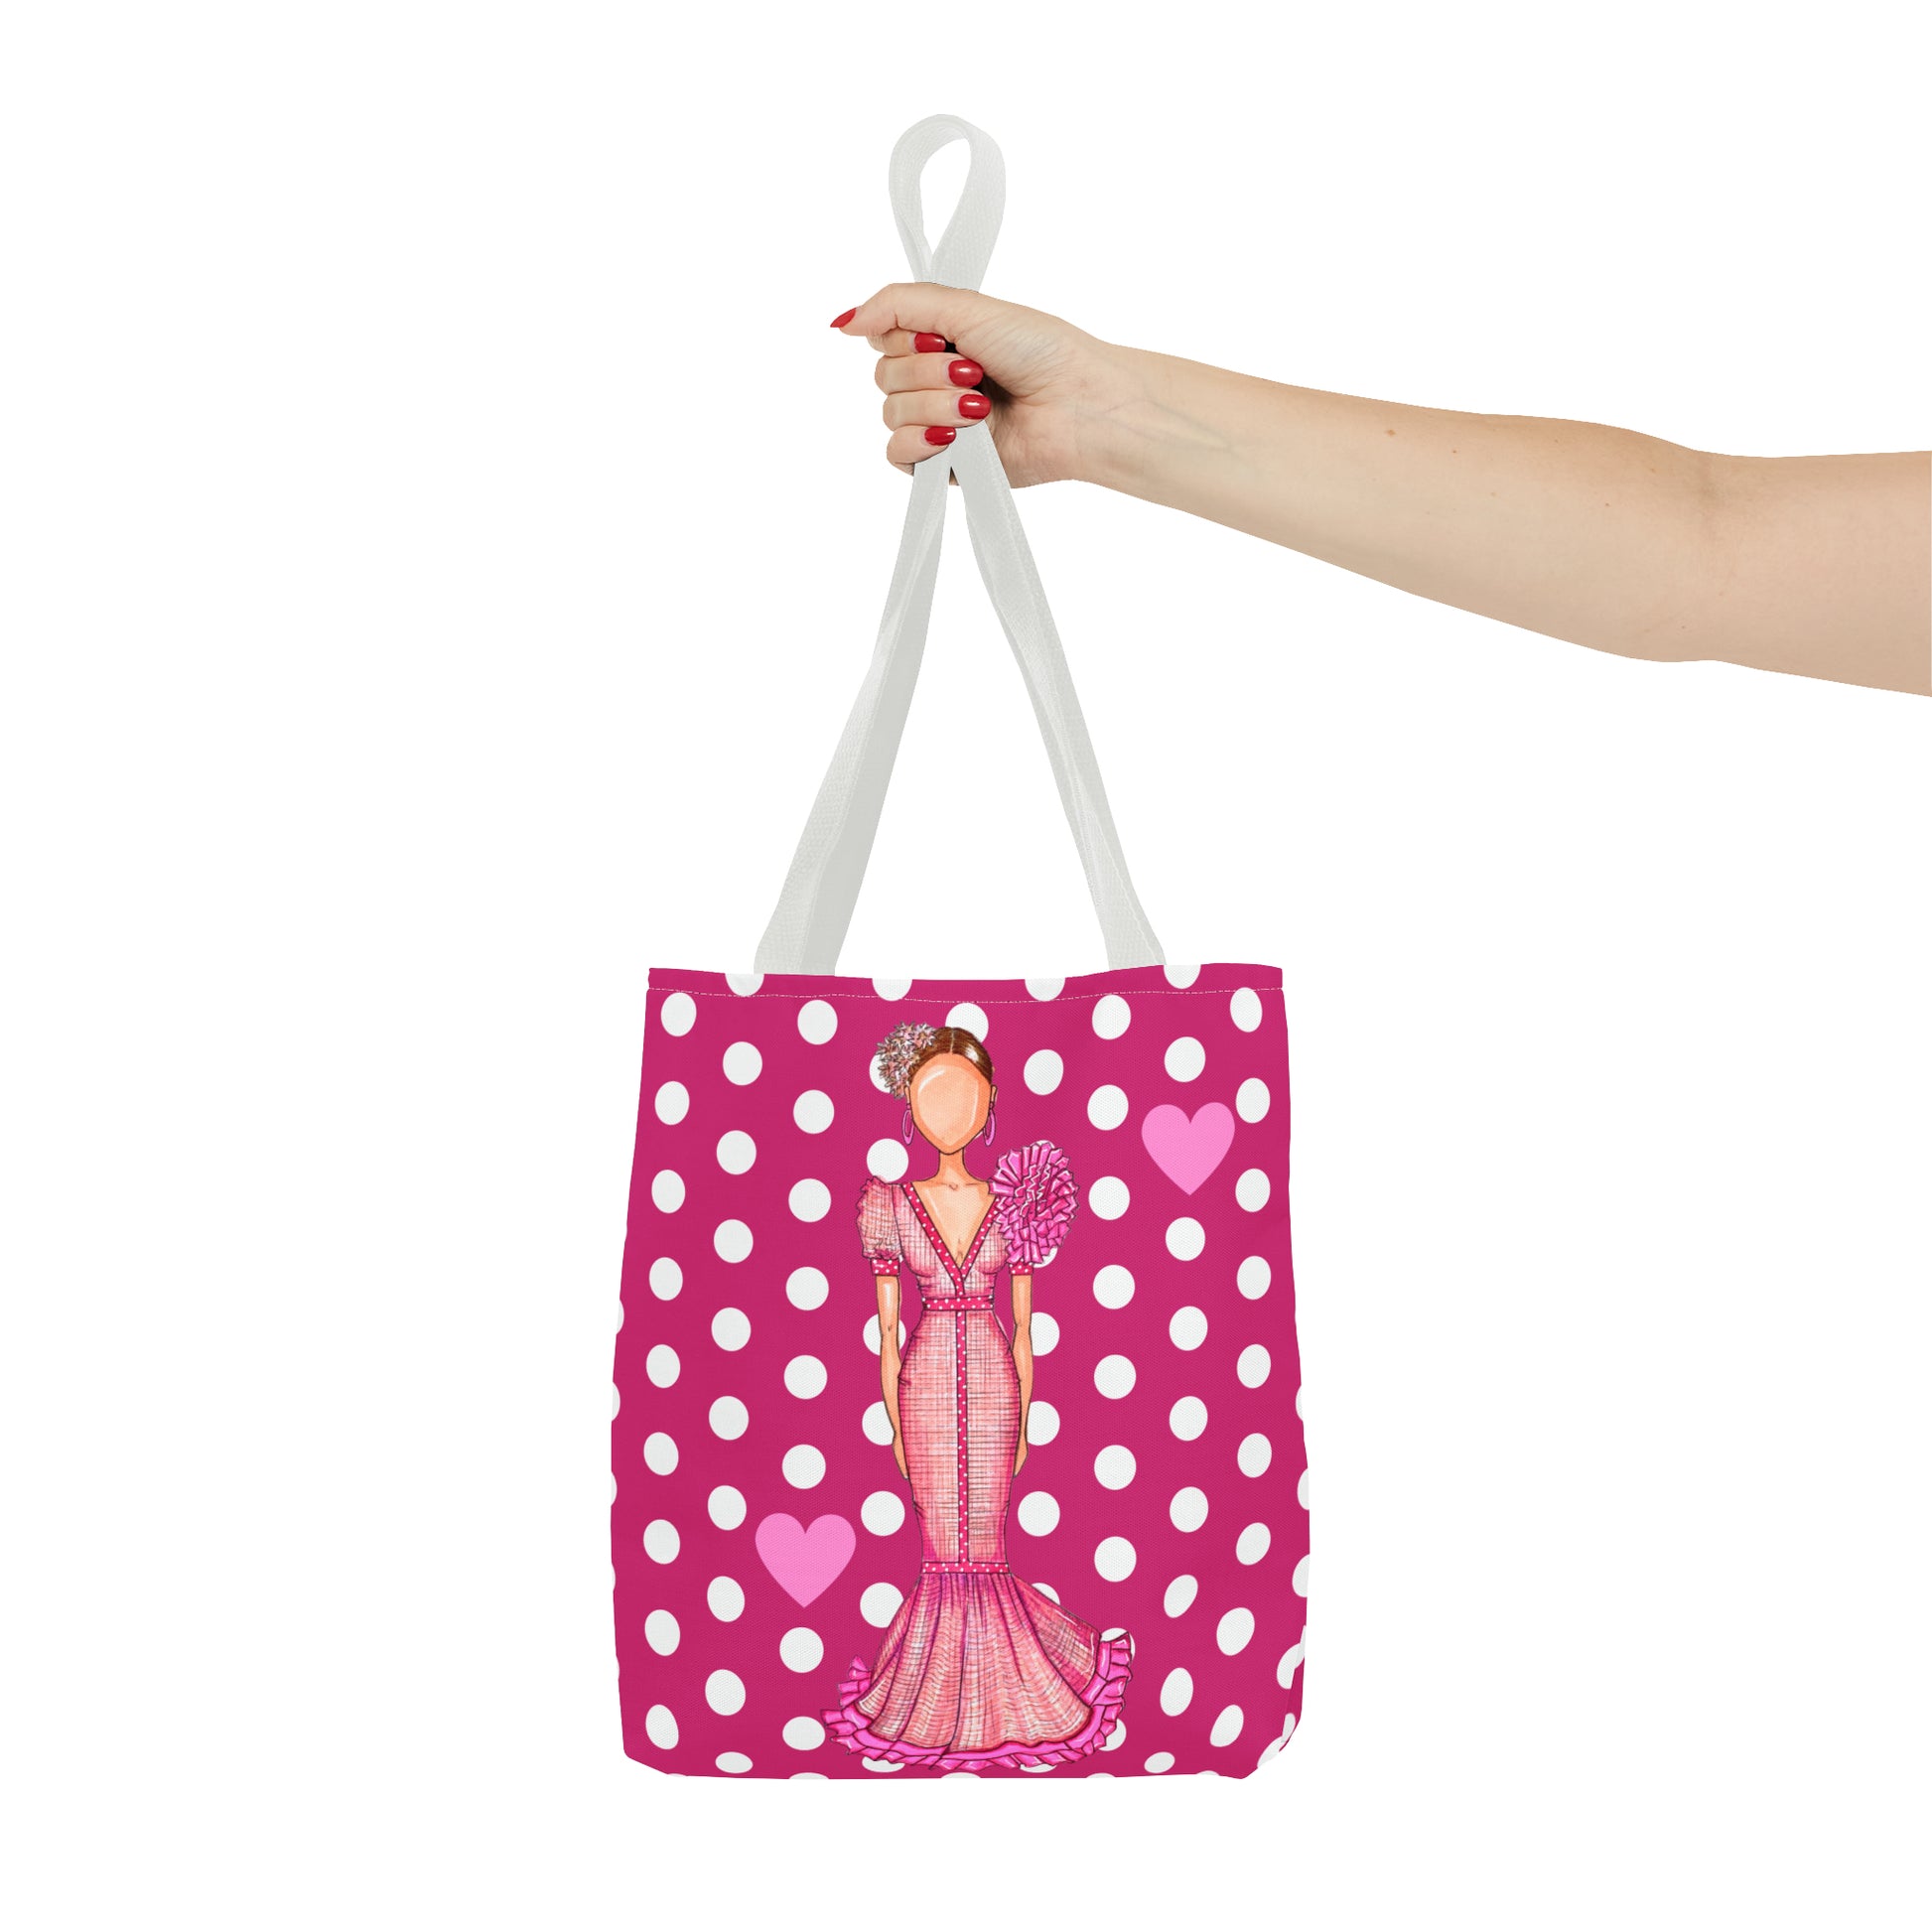 a woman's hand holding a pink shopping bag with a picture of a woman